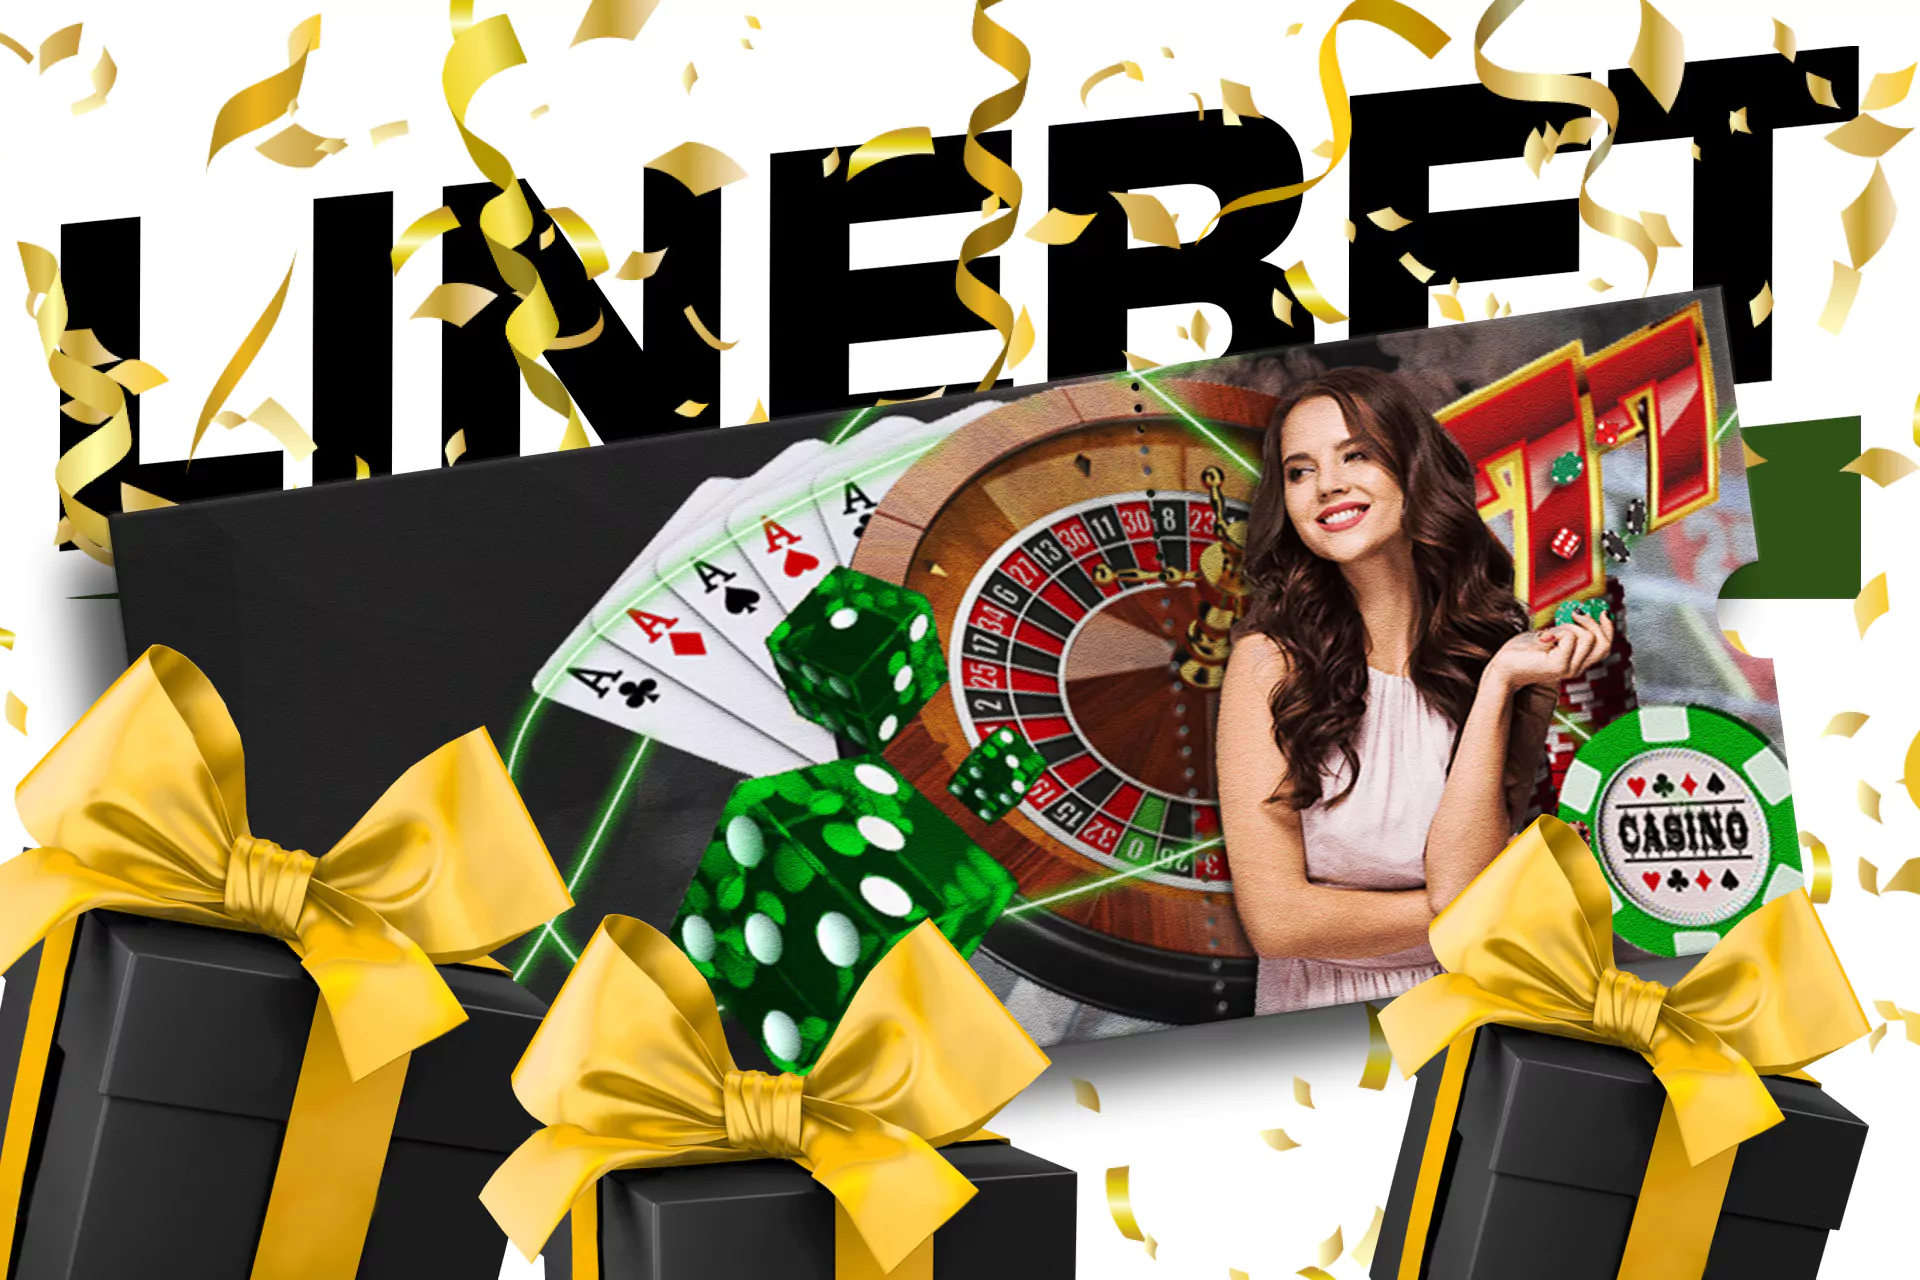 In Linebet, get a special bonus on slots, play with more profit.